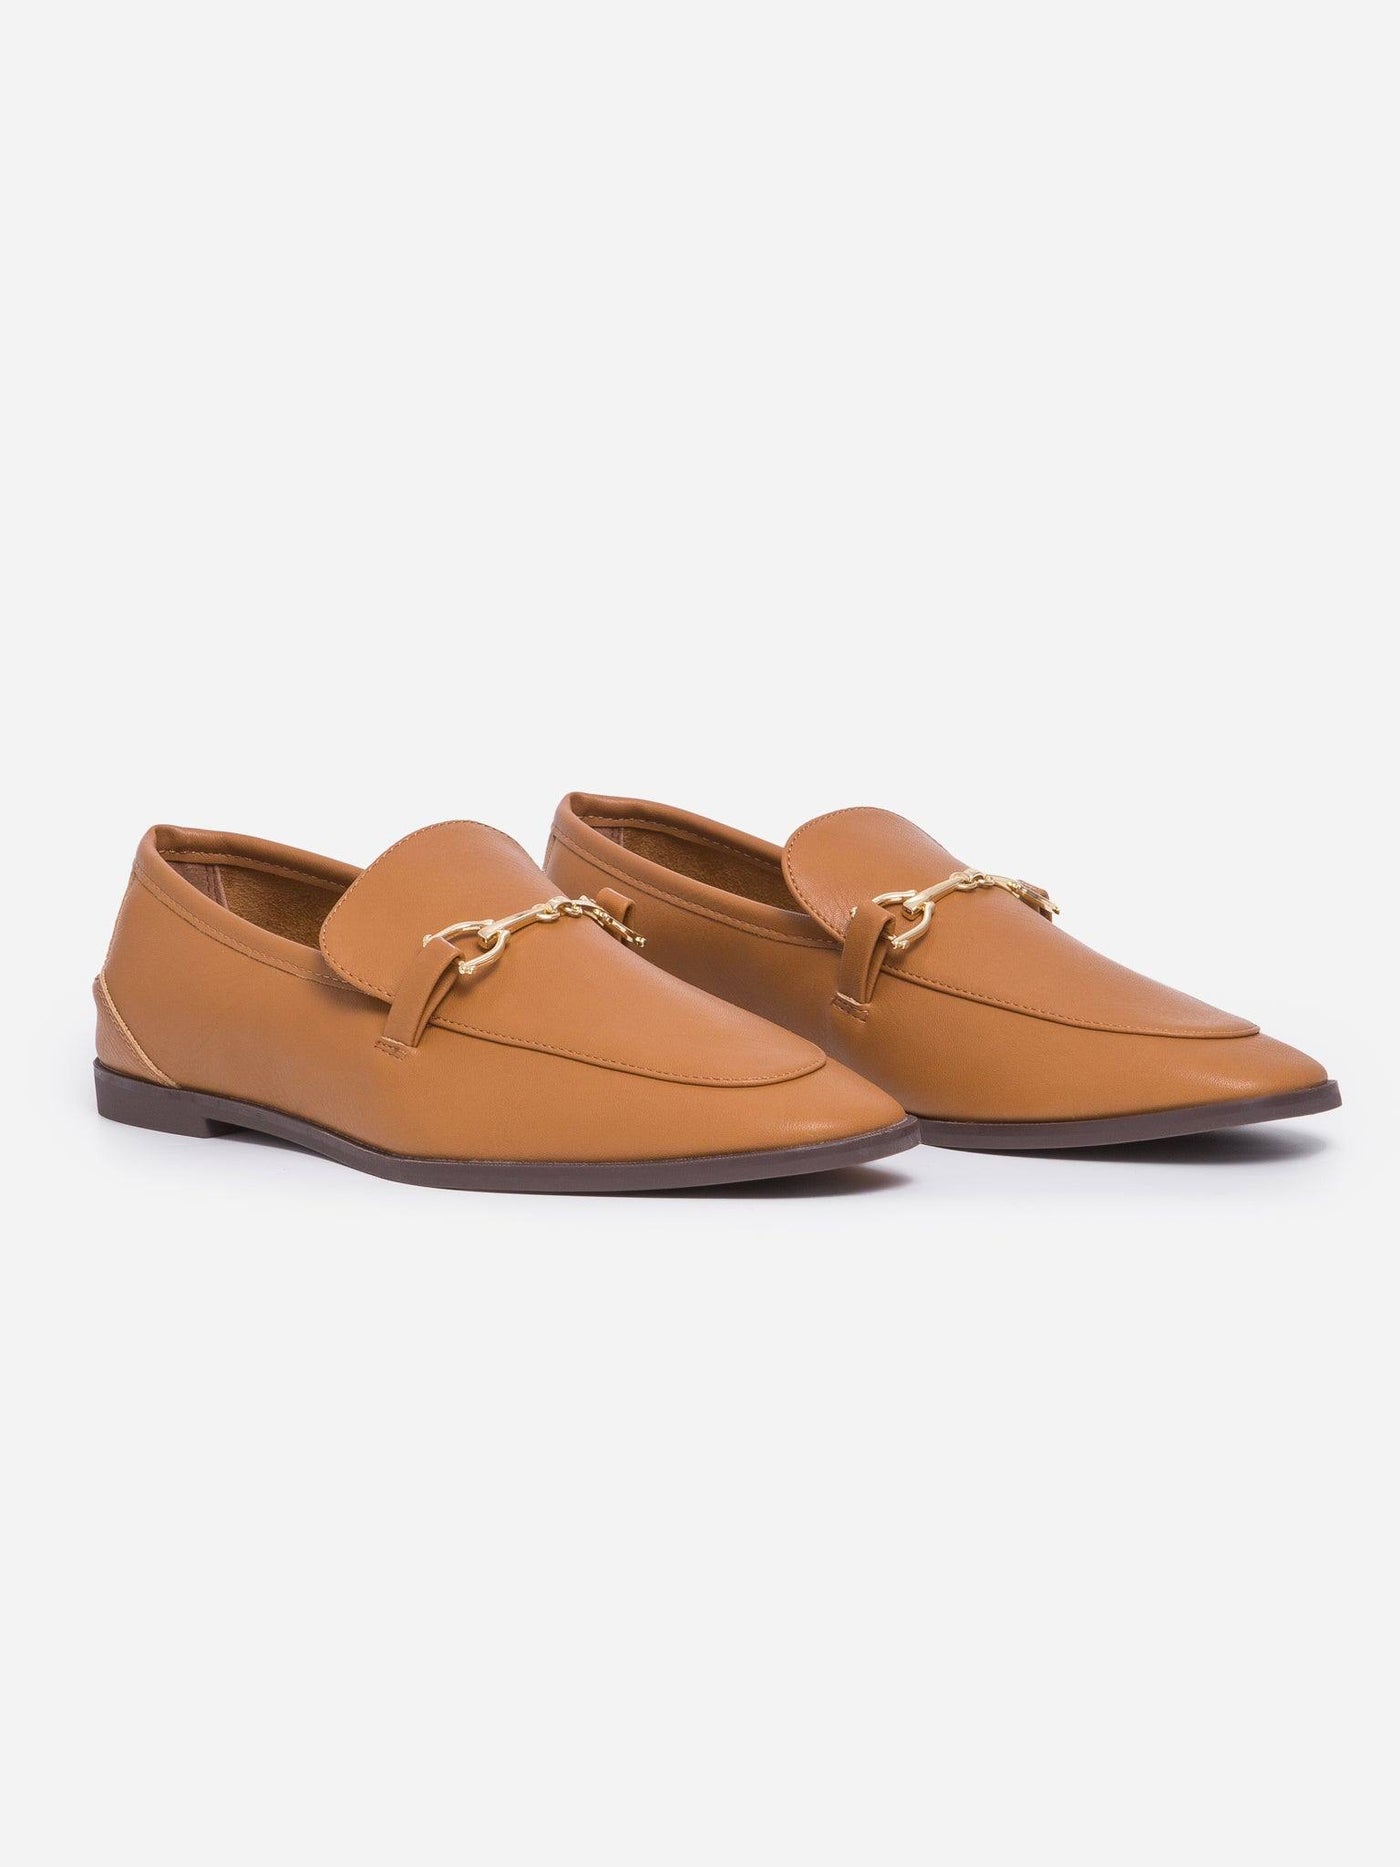 Zapato Classic Camel - MMShoes